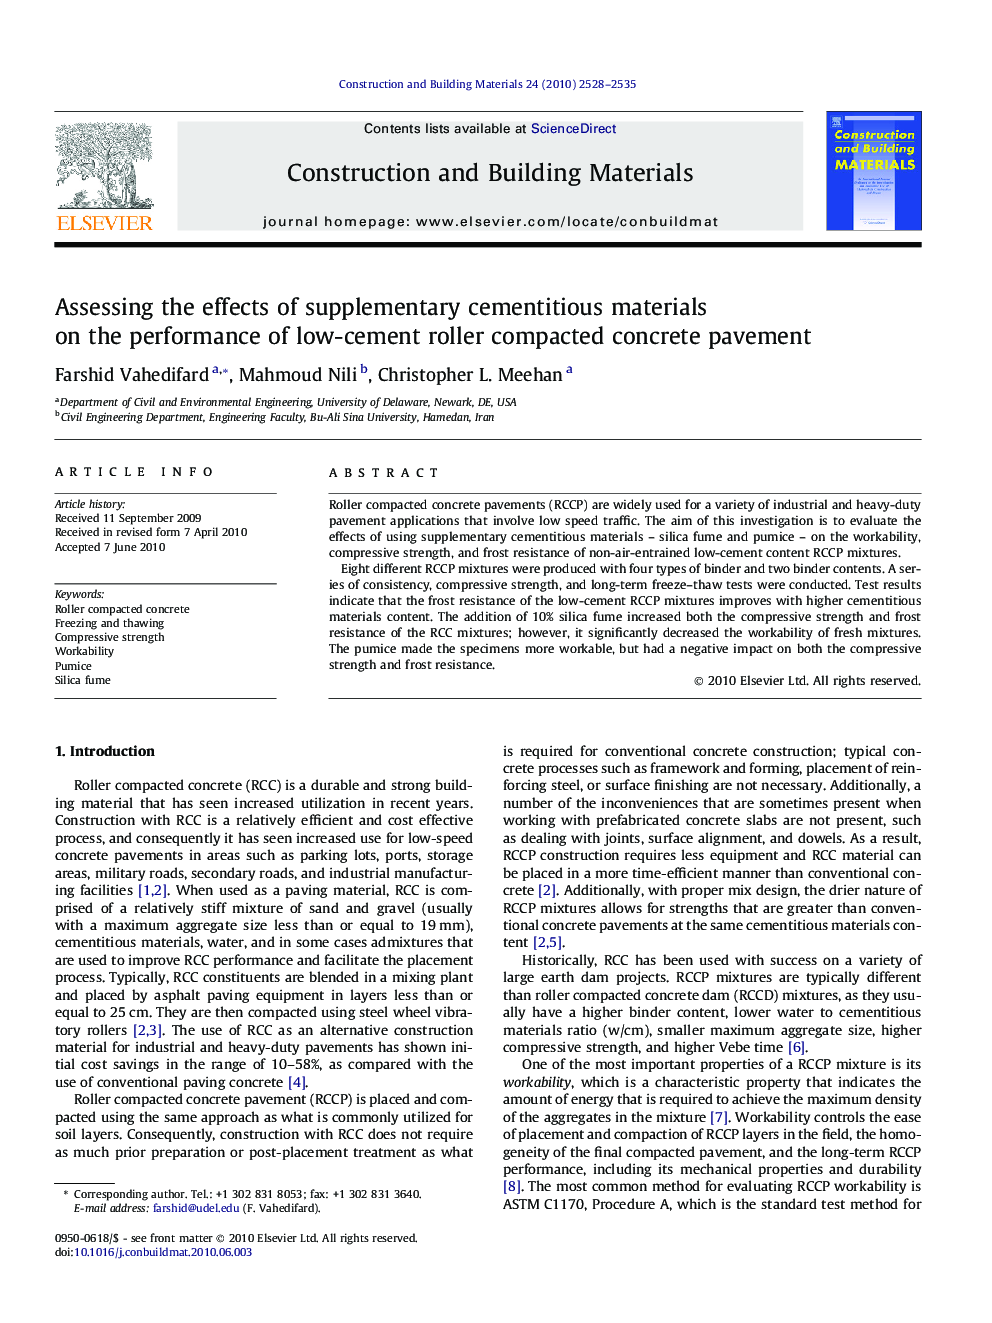 Assessing the effects of supplementary cementitious materials on the performance of low-cement roller compacted concrete pavement